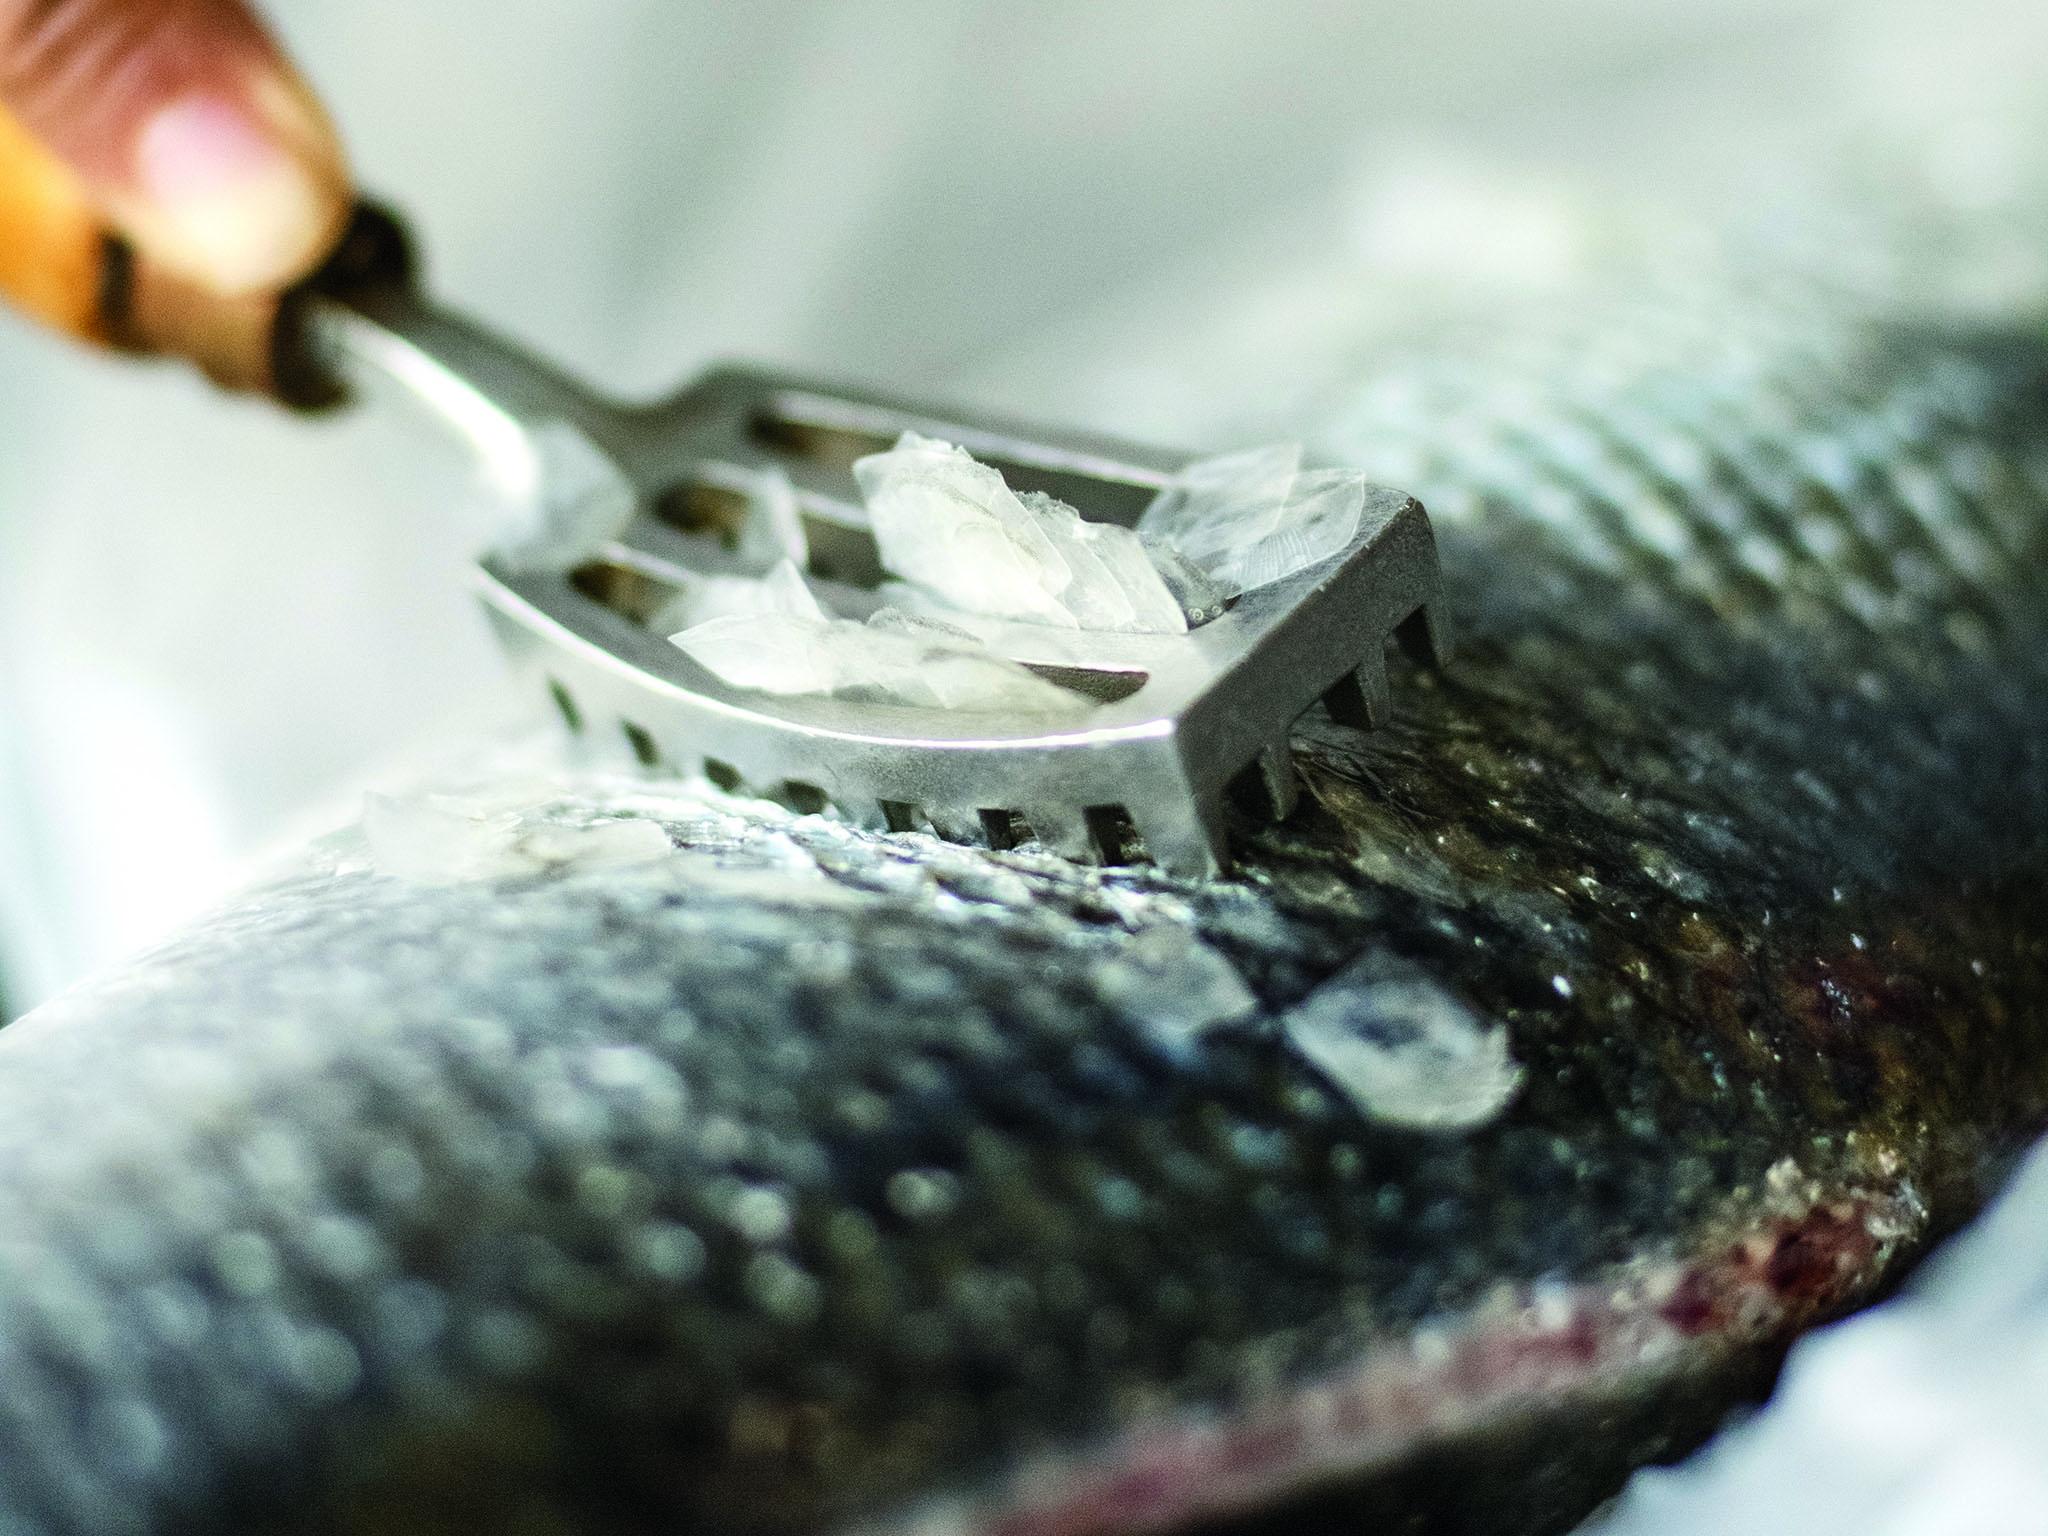 2. Use a fish scaler or the back of a knife to descale the fish: hold the tail and scrape the scales off from tail to head. This will be messy!